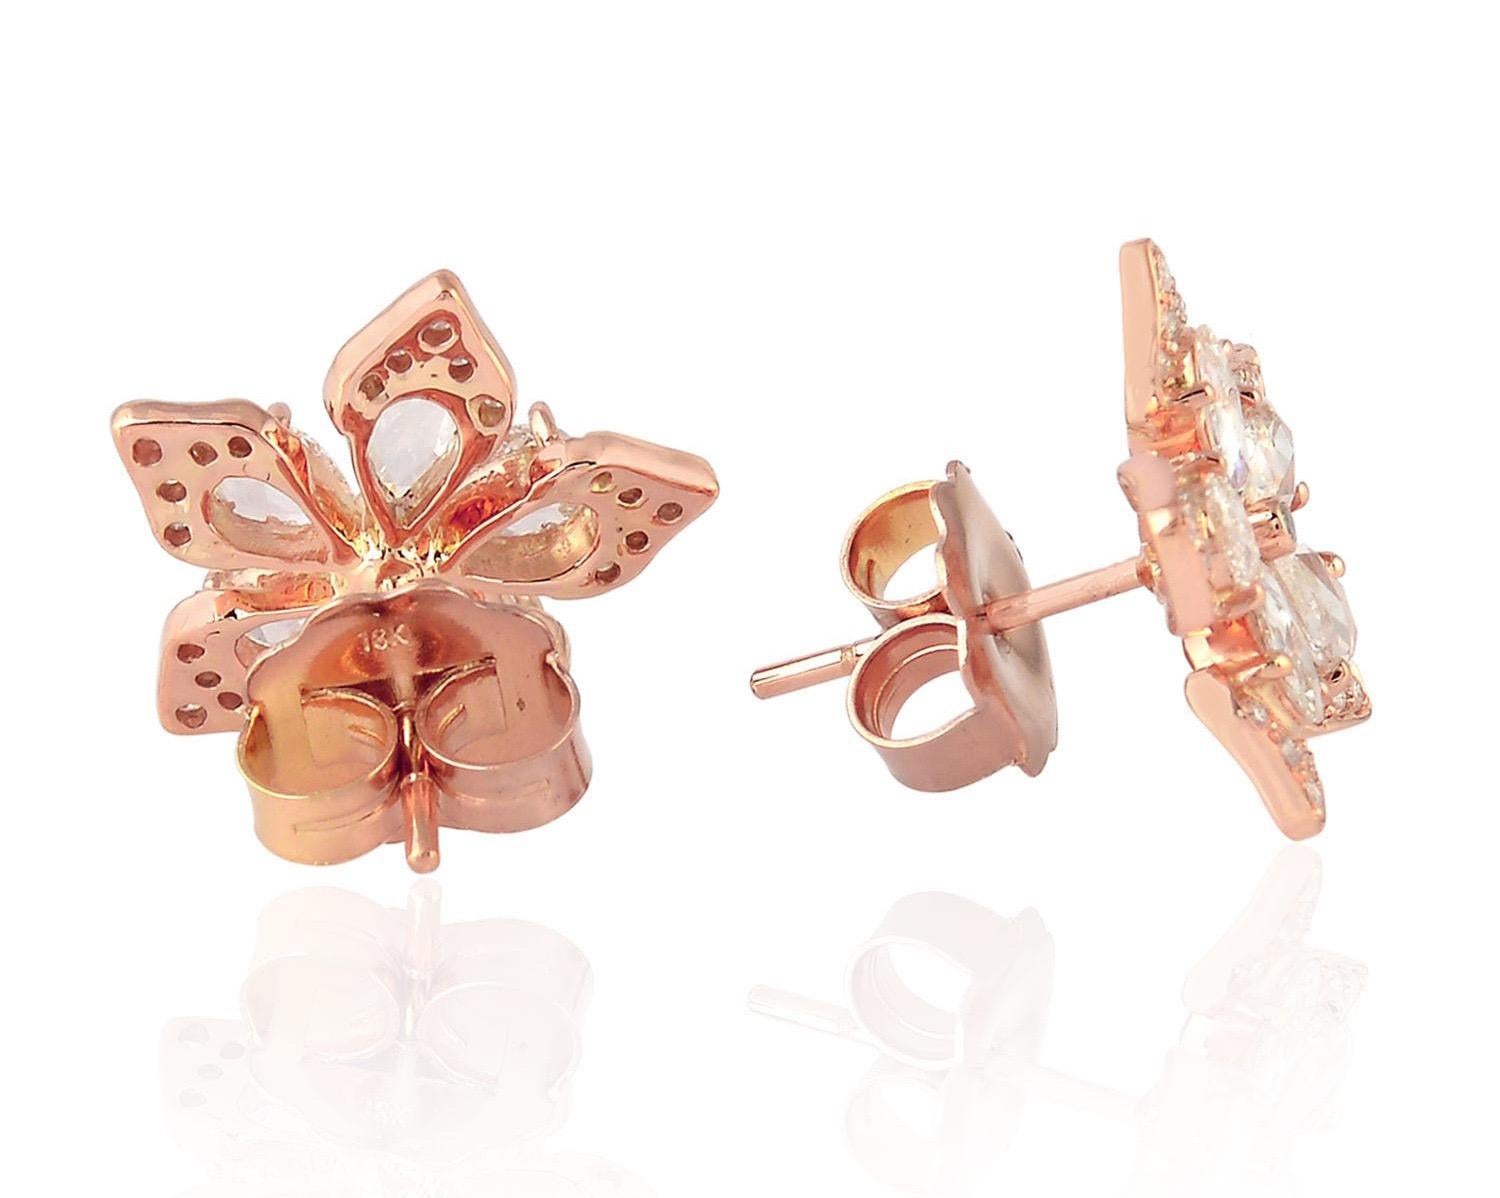 Cast from 18-karat rose gold, these flower earrings are hand set with 1.73 carats of rose cut diamonds for just the right amount of sparkle.

FOLLOW  MEGHNA JEWELS storefront to view the latest collection & exclusive pieces.  Meghna Jewels is